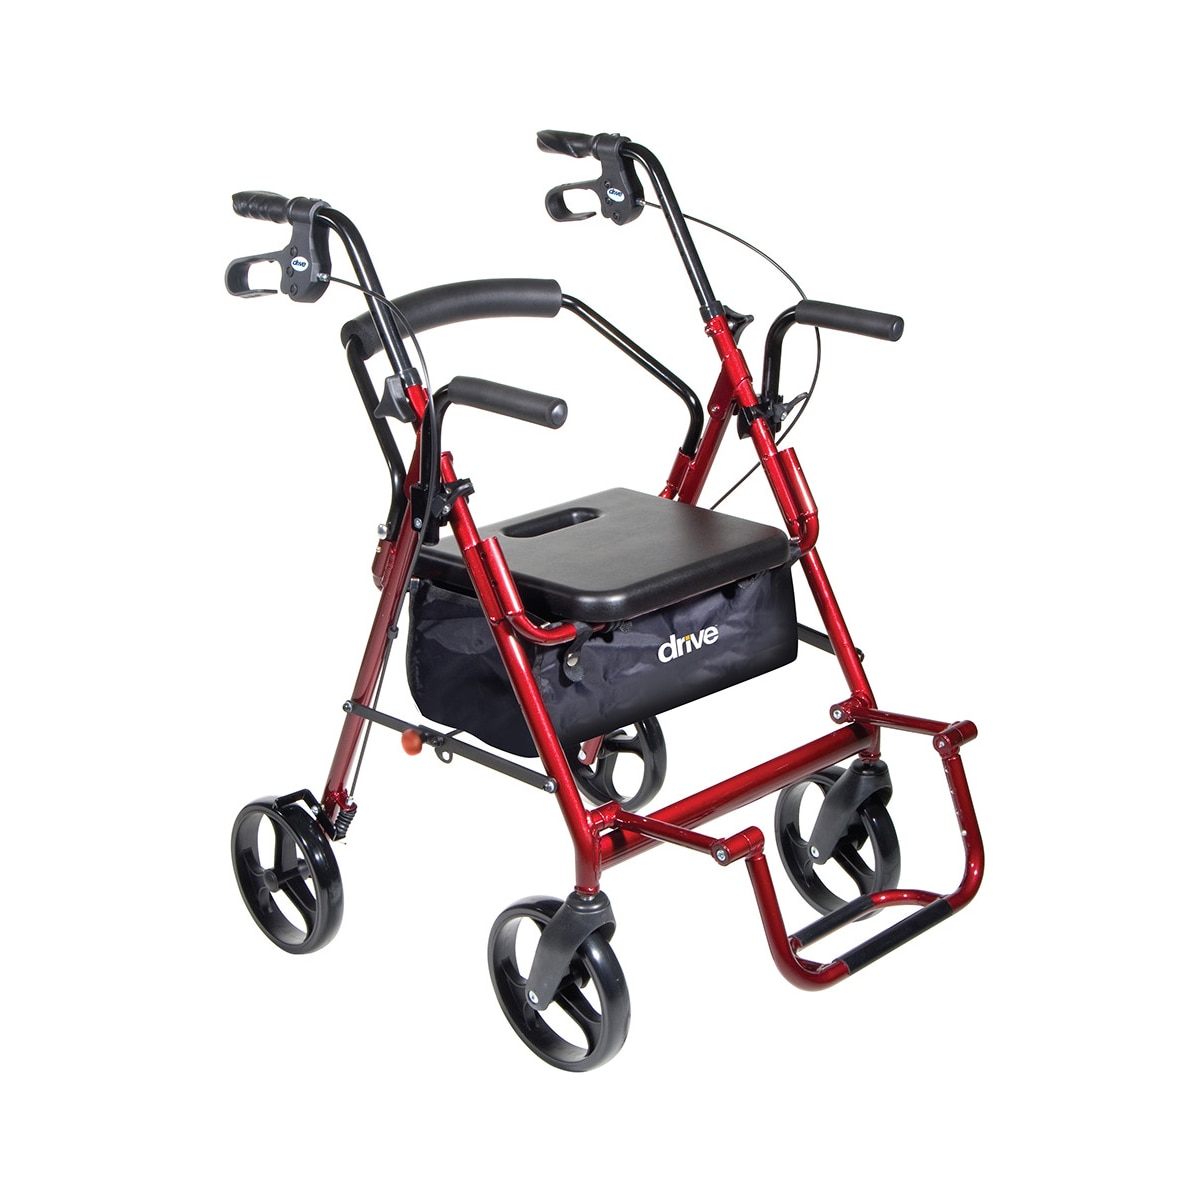 Drive Duet rollator and transport chair in one with red frame, seat, and foot rest